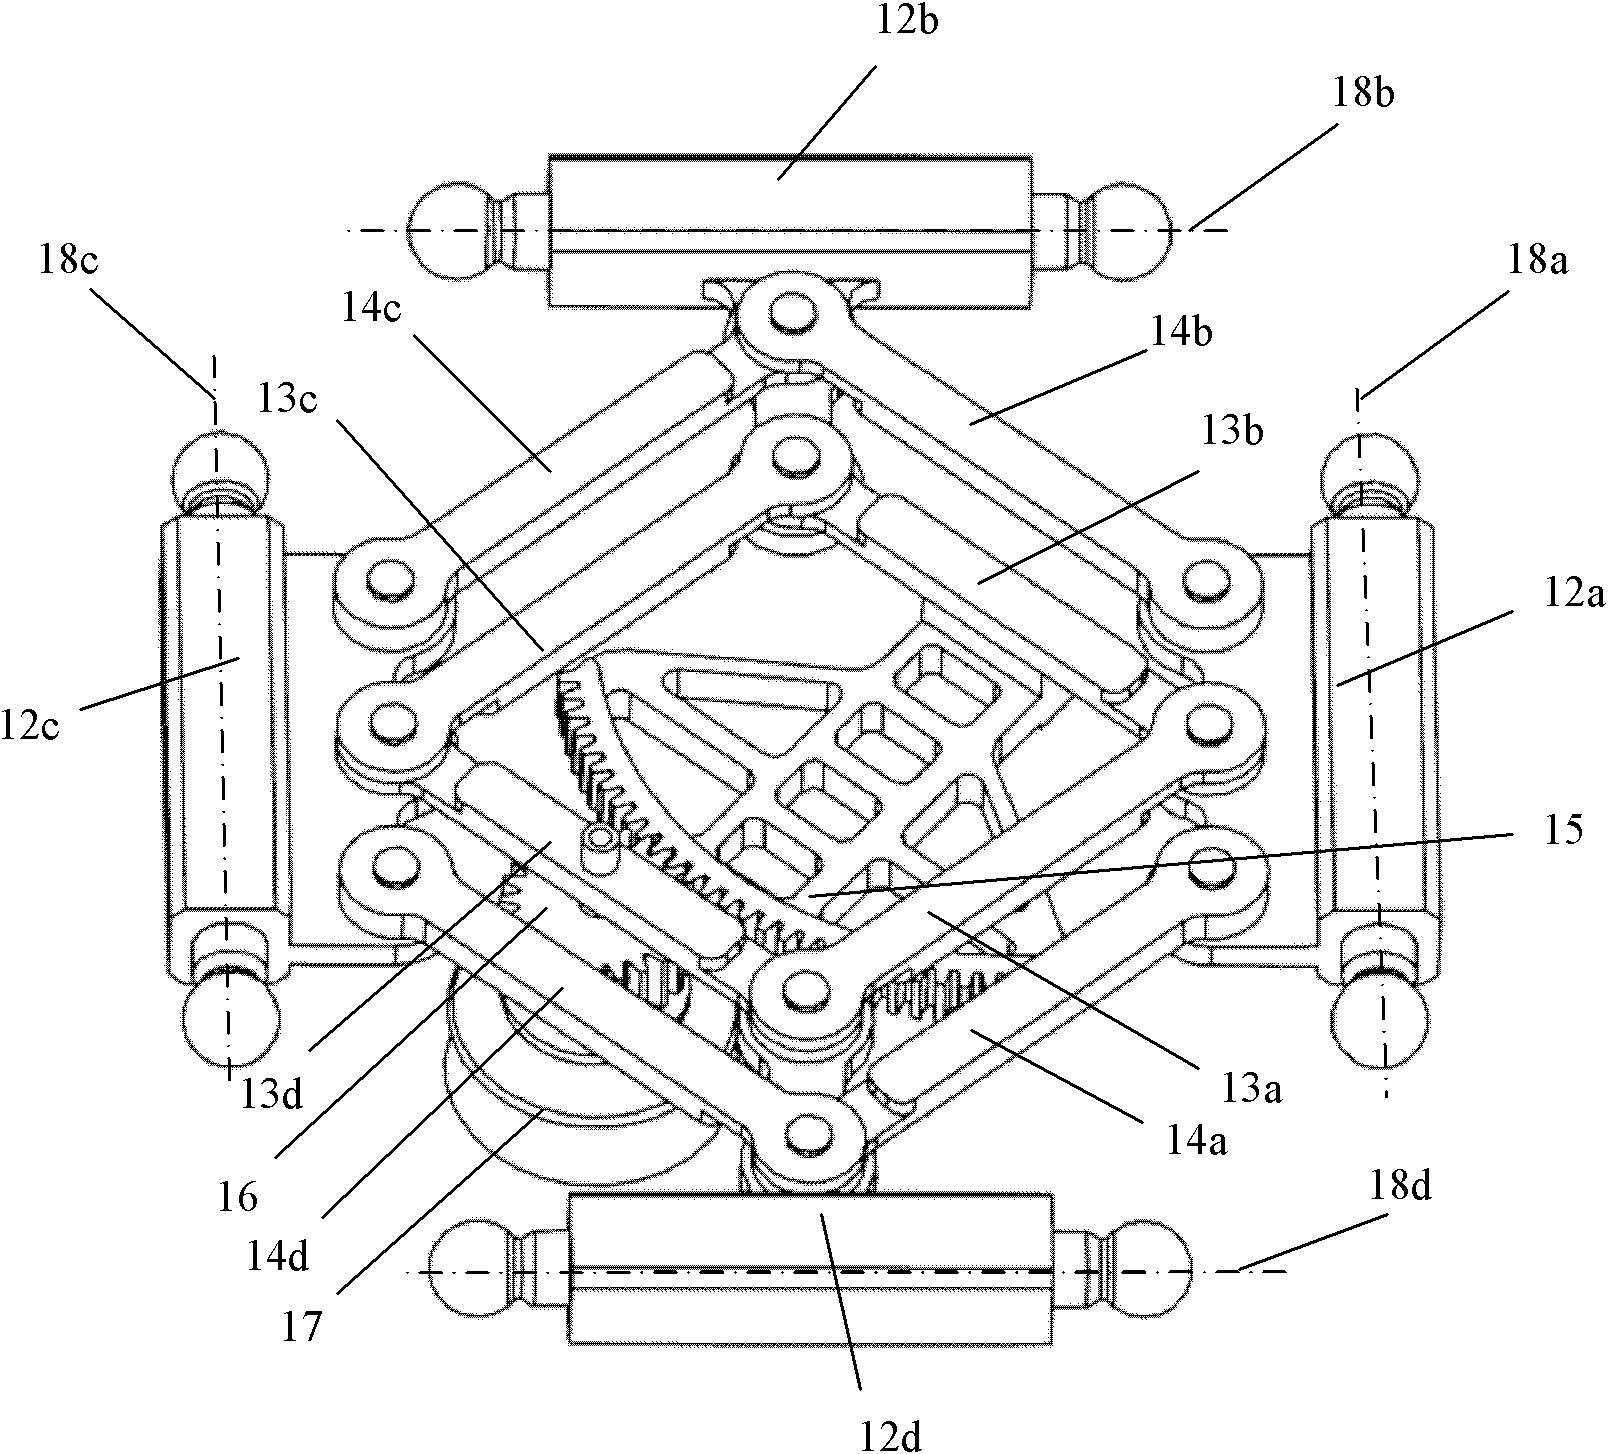 Over-constraint parallel mechanism with three degrees of freedom